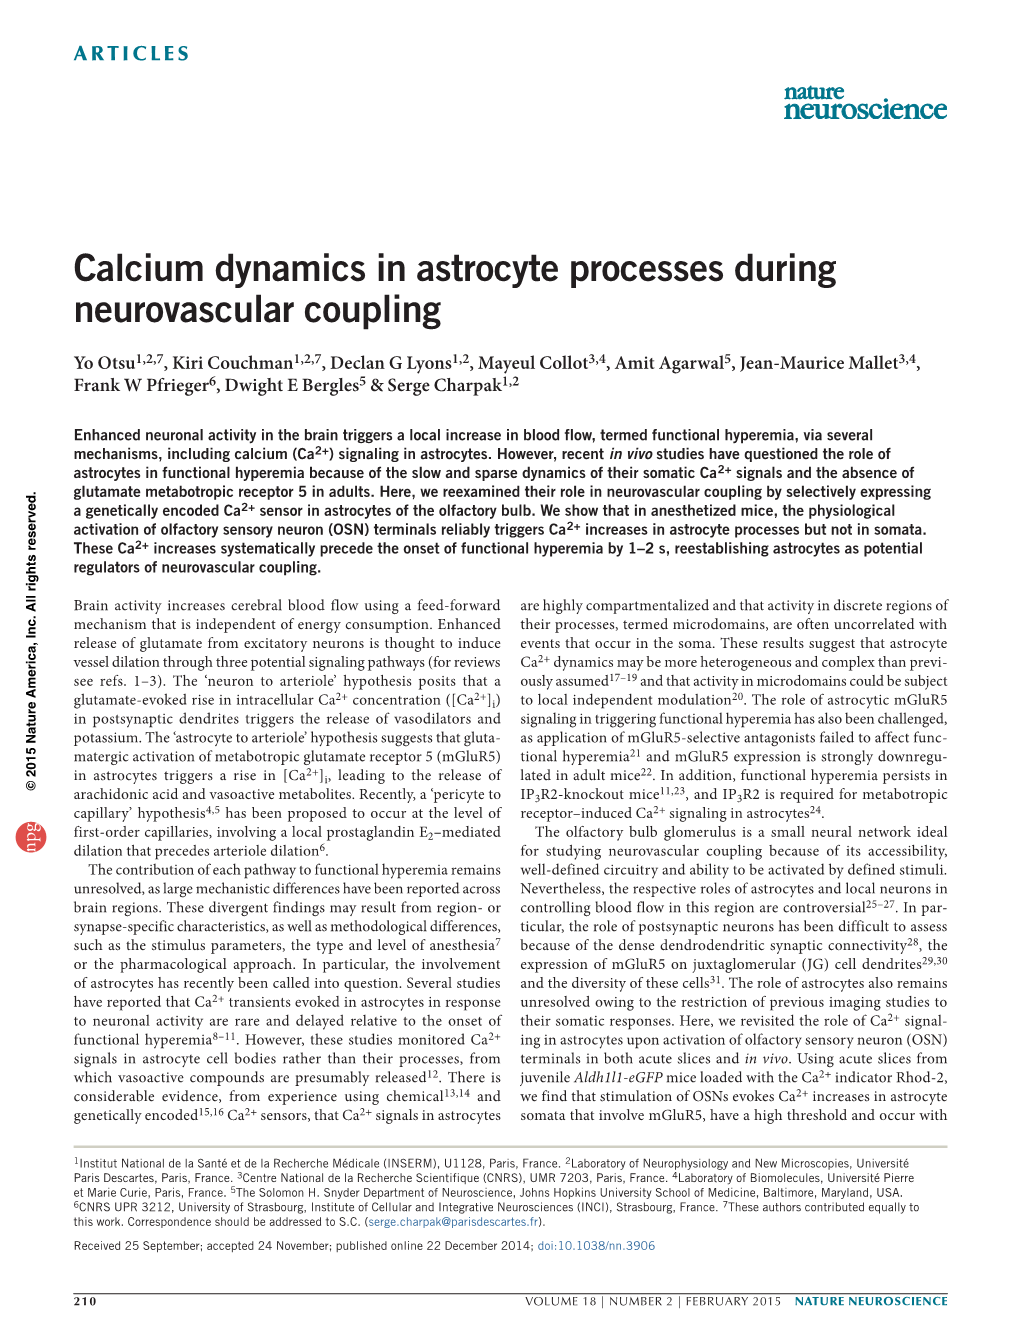 Calcium Dynamics in Astrocyte Processes During Neurovascular Coupling